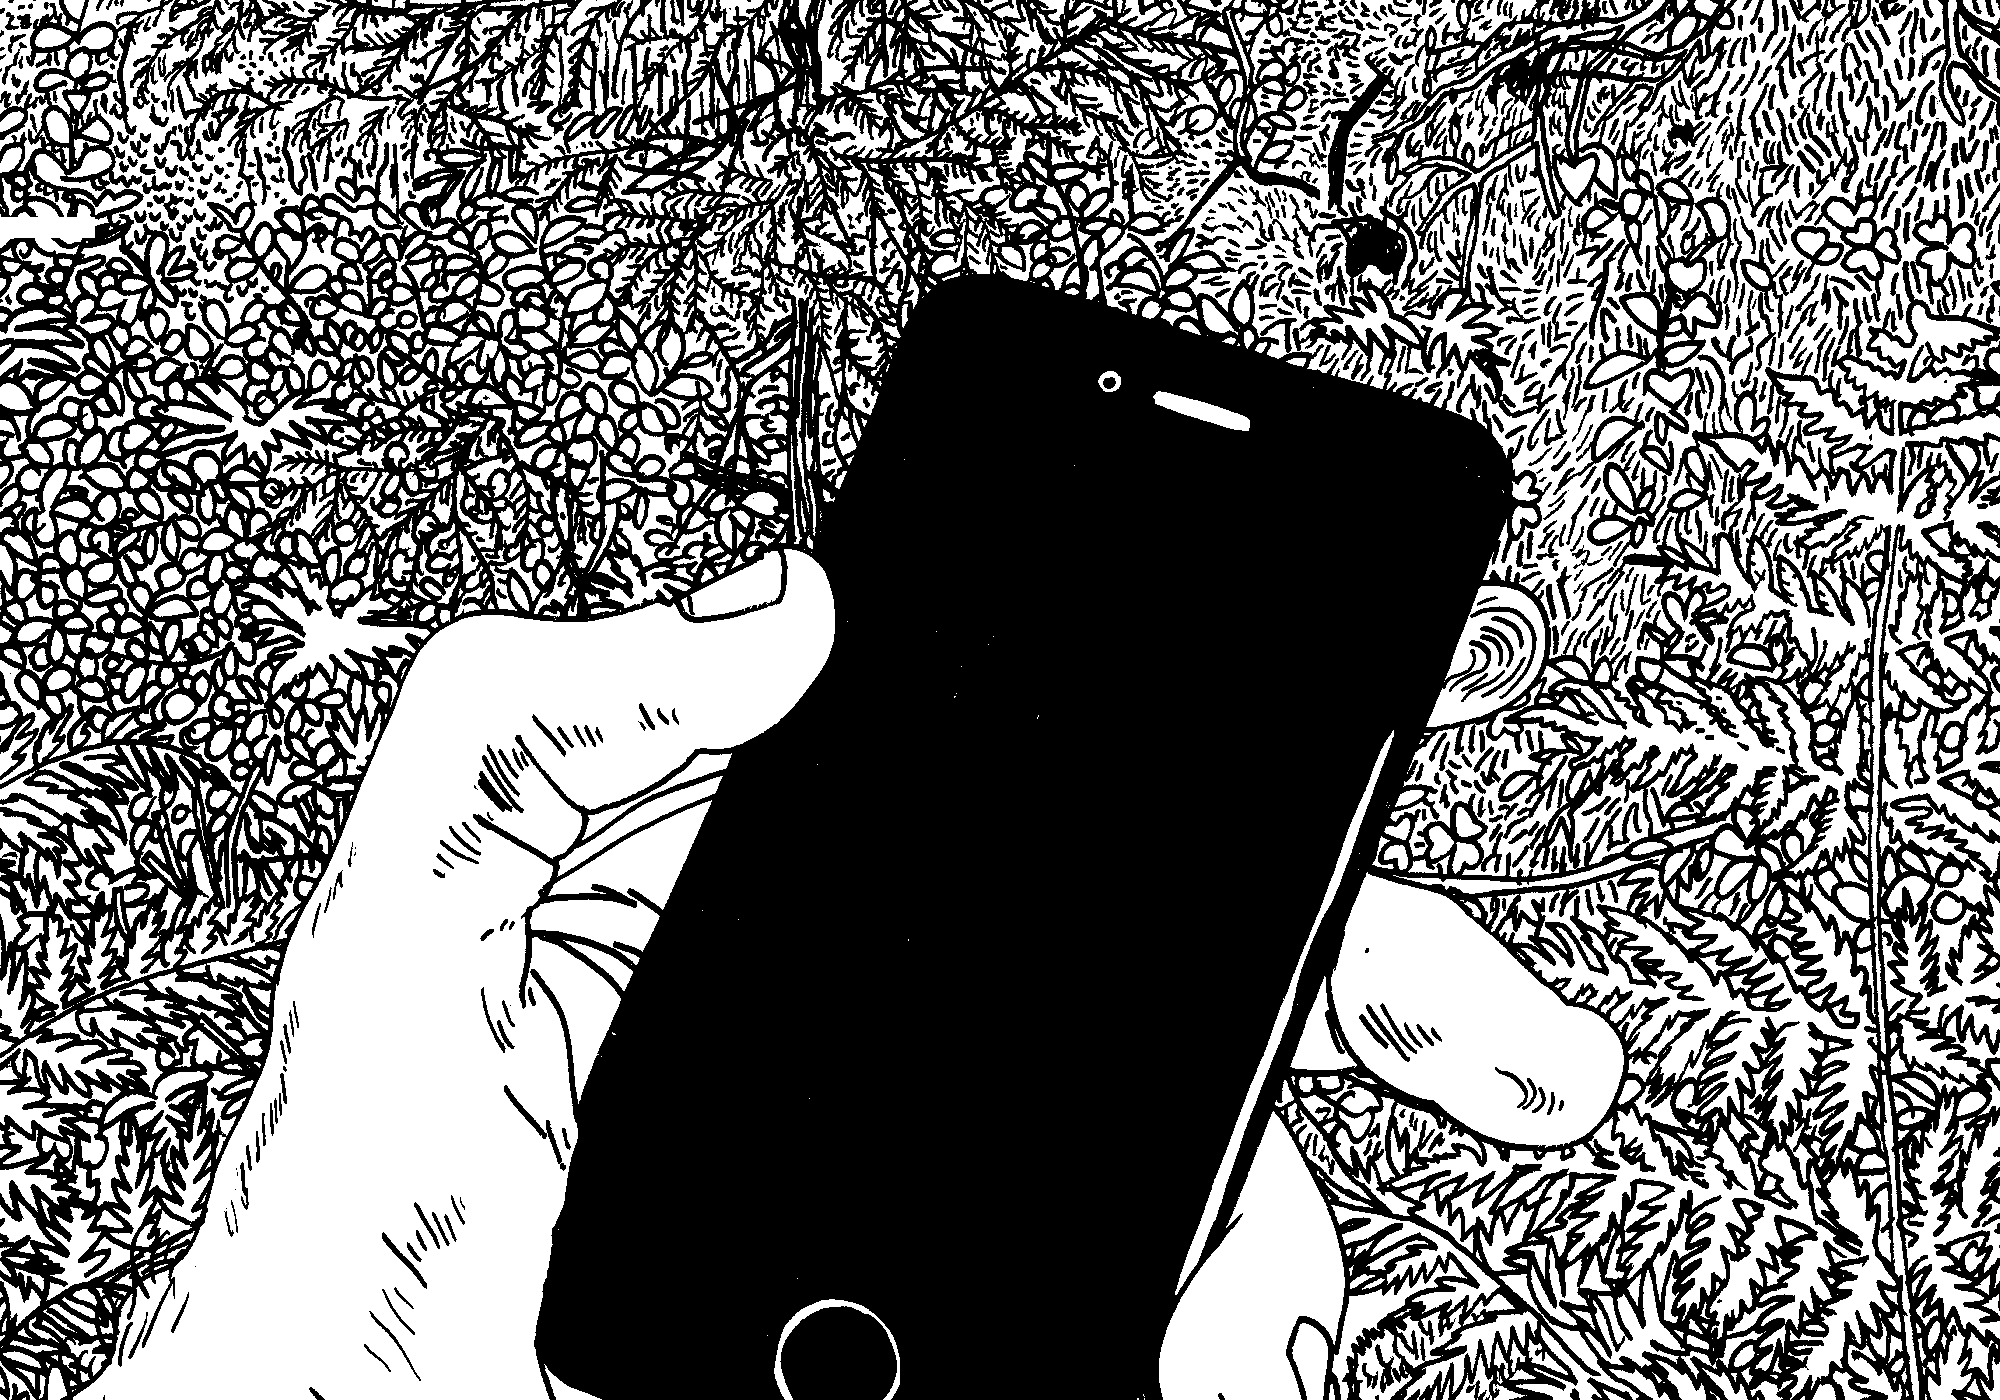 Illustration of a hand holding a phone. On the phone screen is an ear with a plant sprouting from it